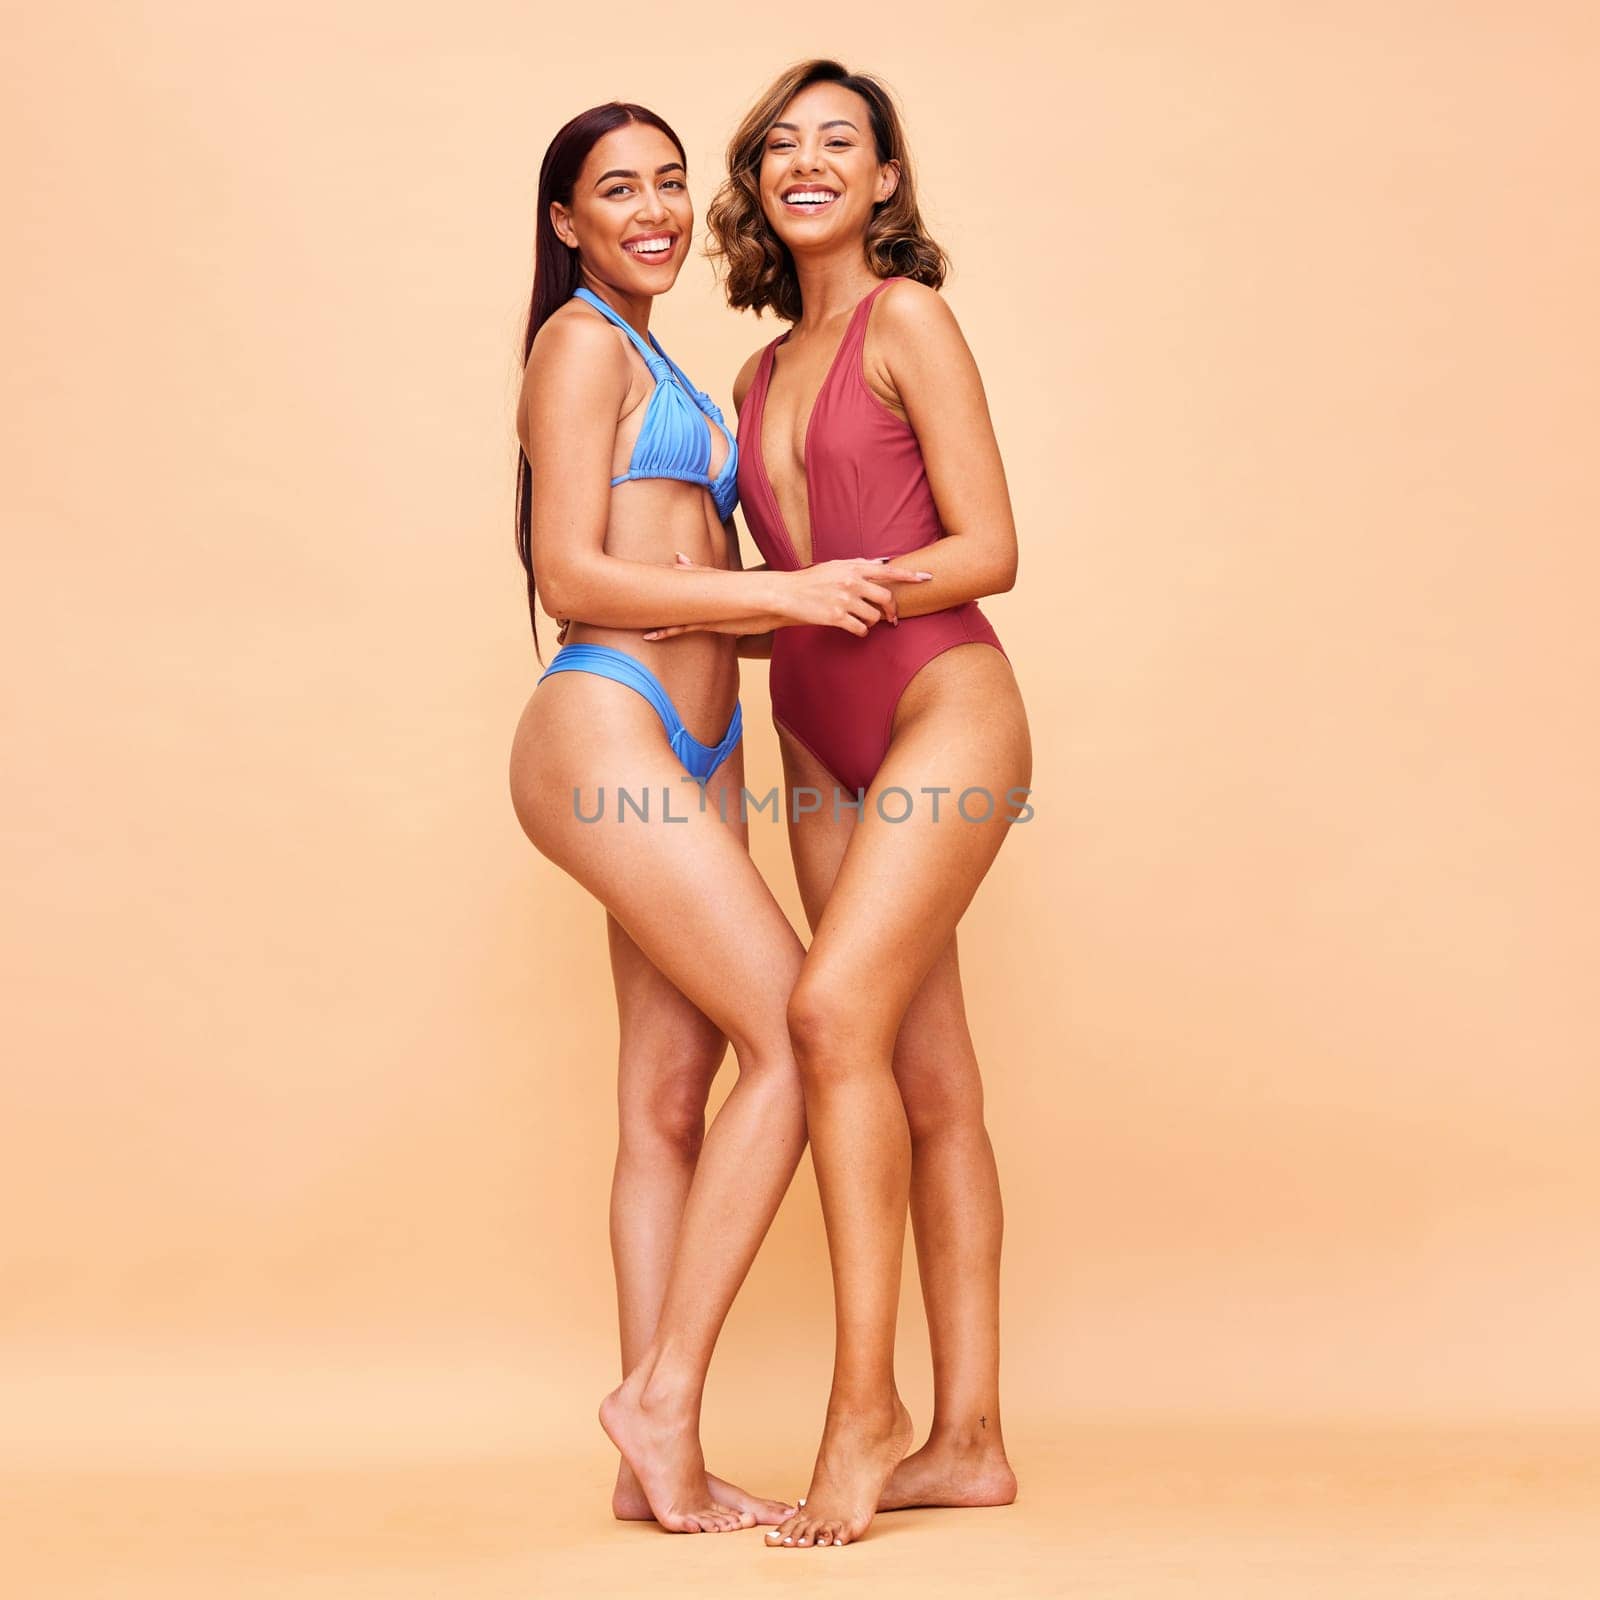 Bikini, beauty and portrait of friends happy for beach vacation together isolated in a studio brown background. Smile, fashion and women with swimsuit style for holiday with happiness in summer.